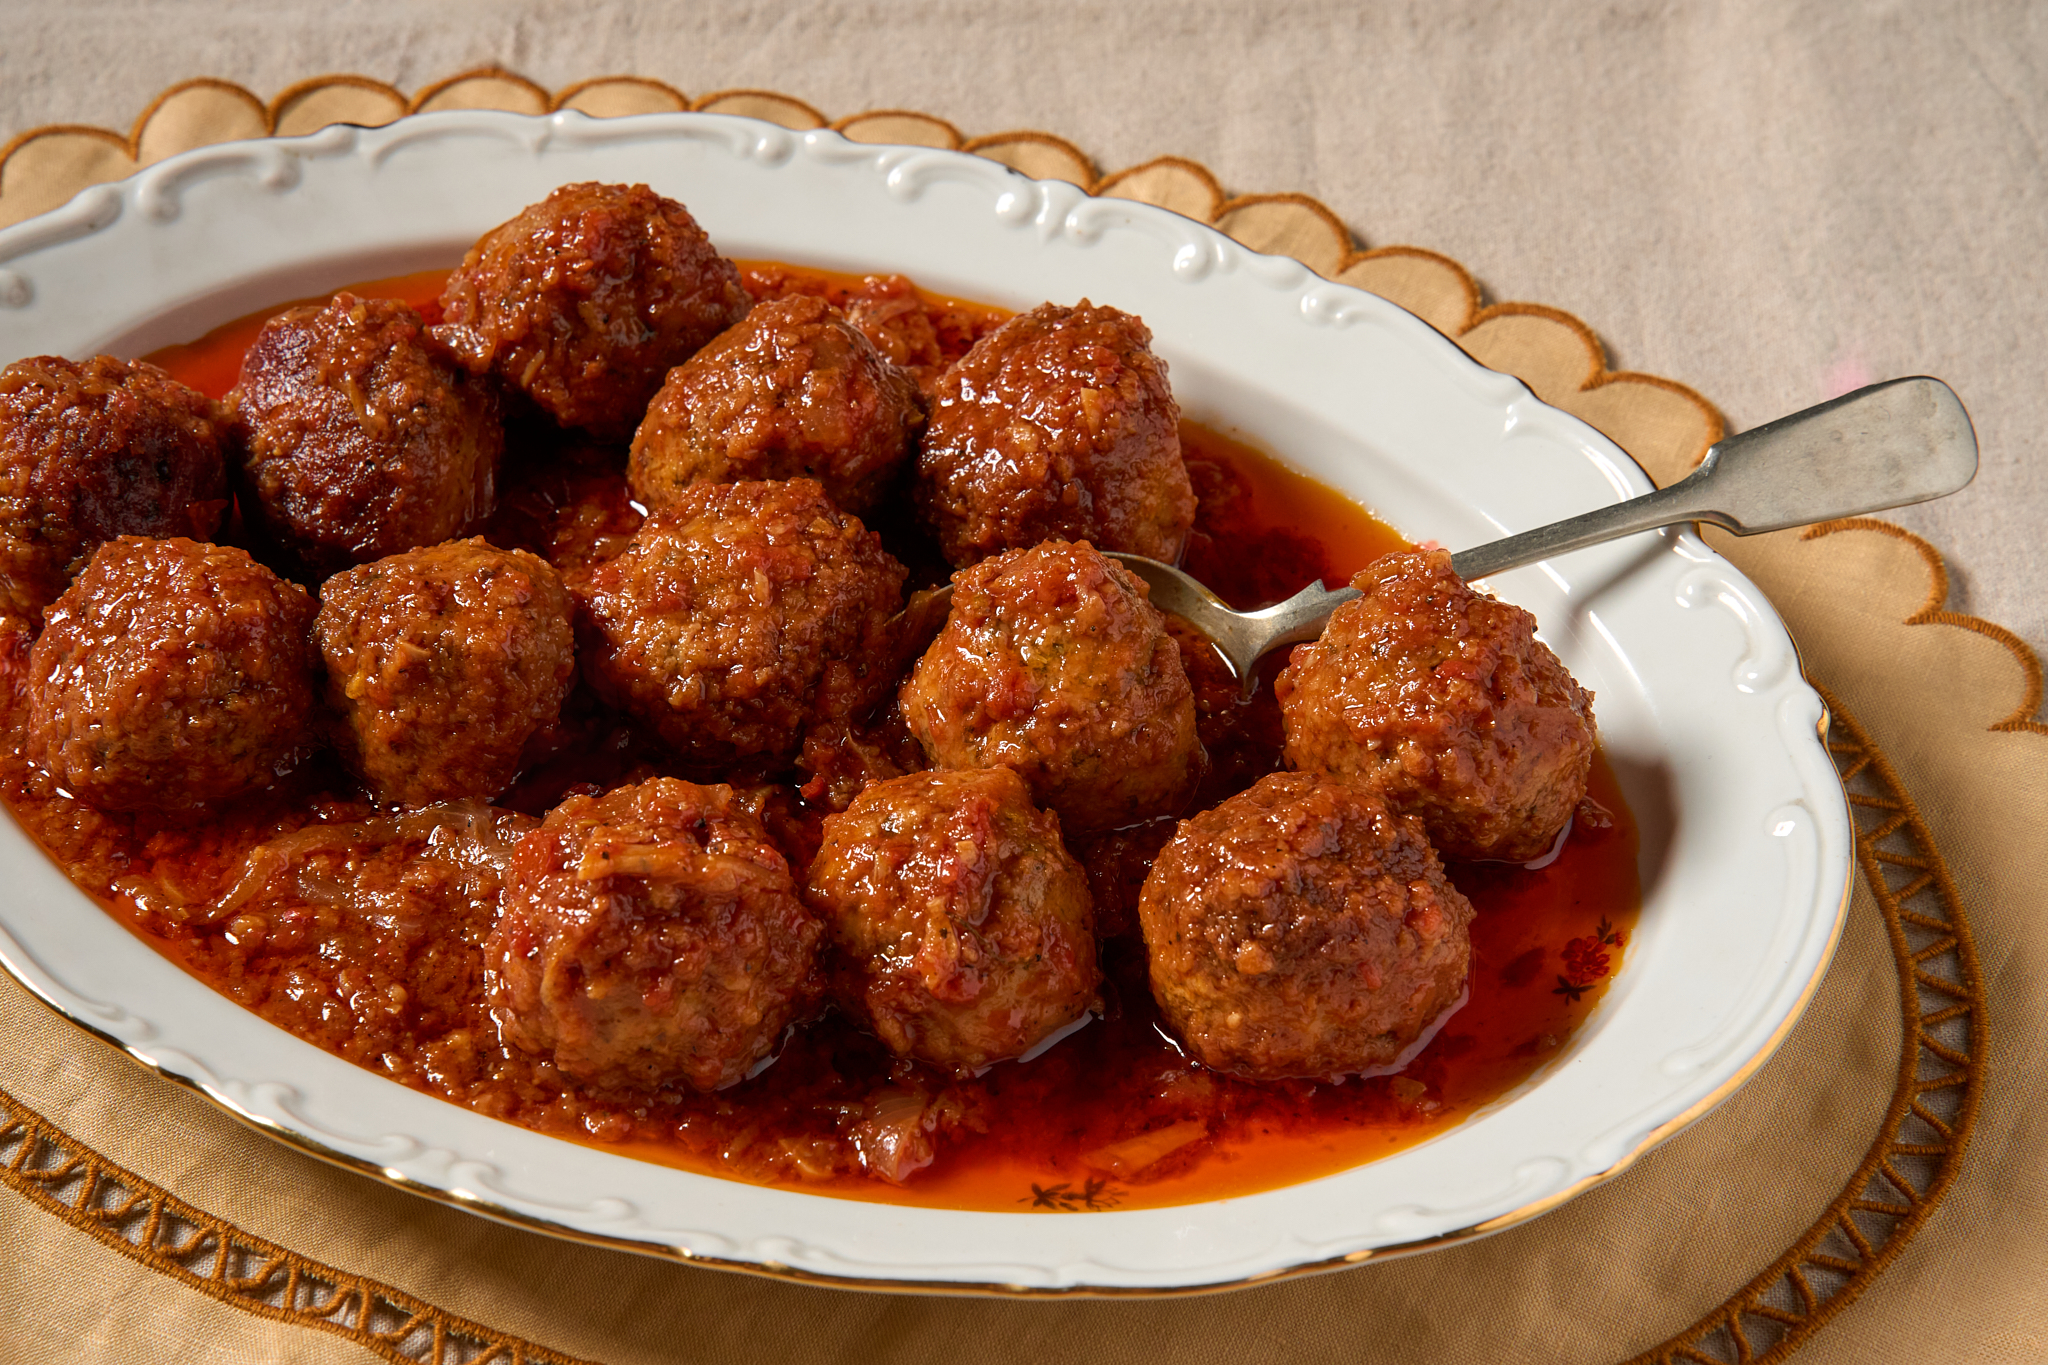 Red meatballs in sauce sit in a white oval-shaped plate